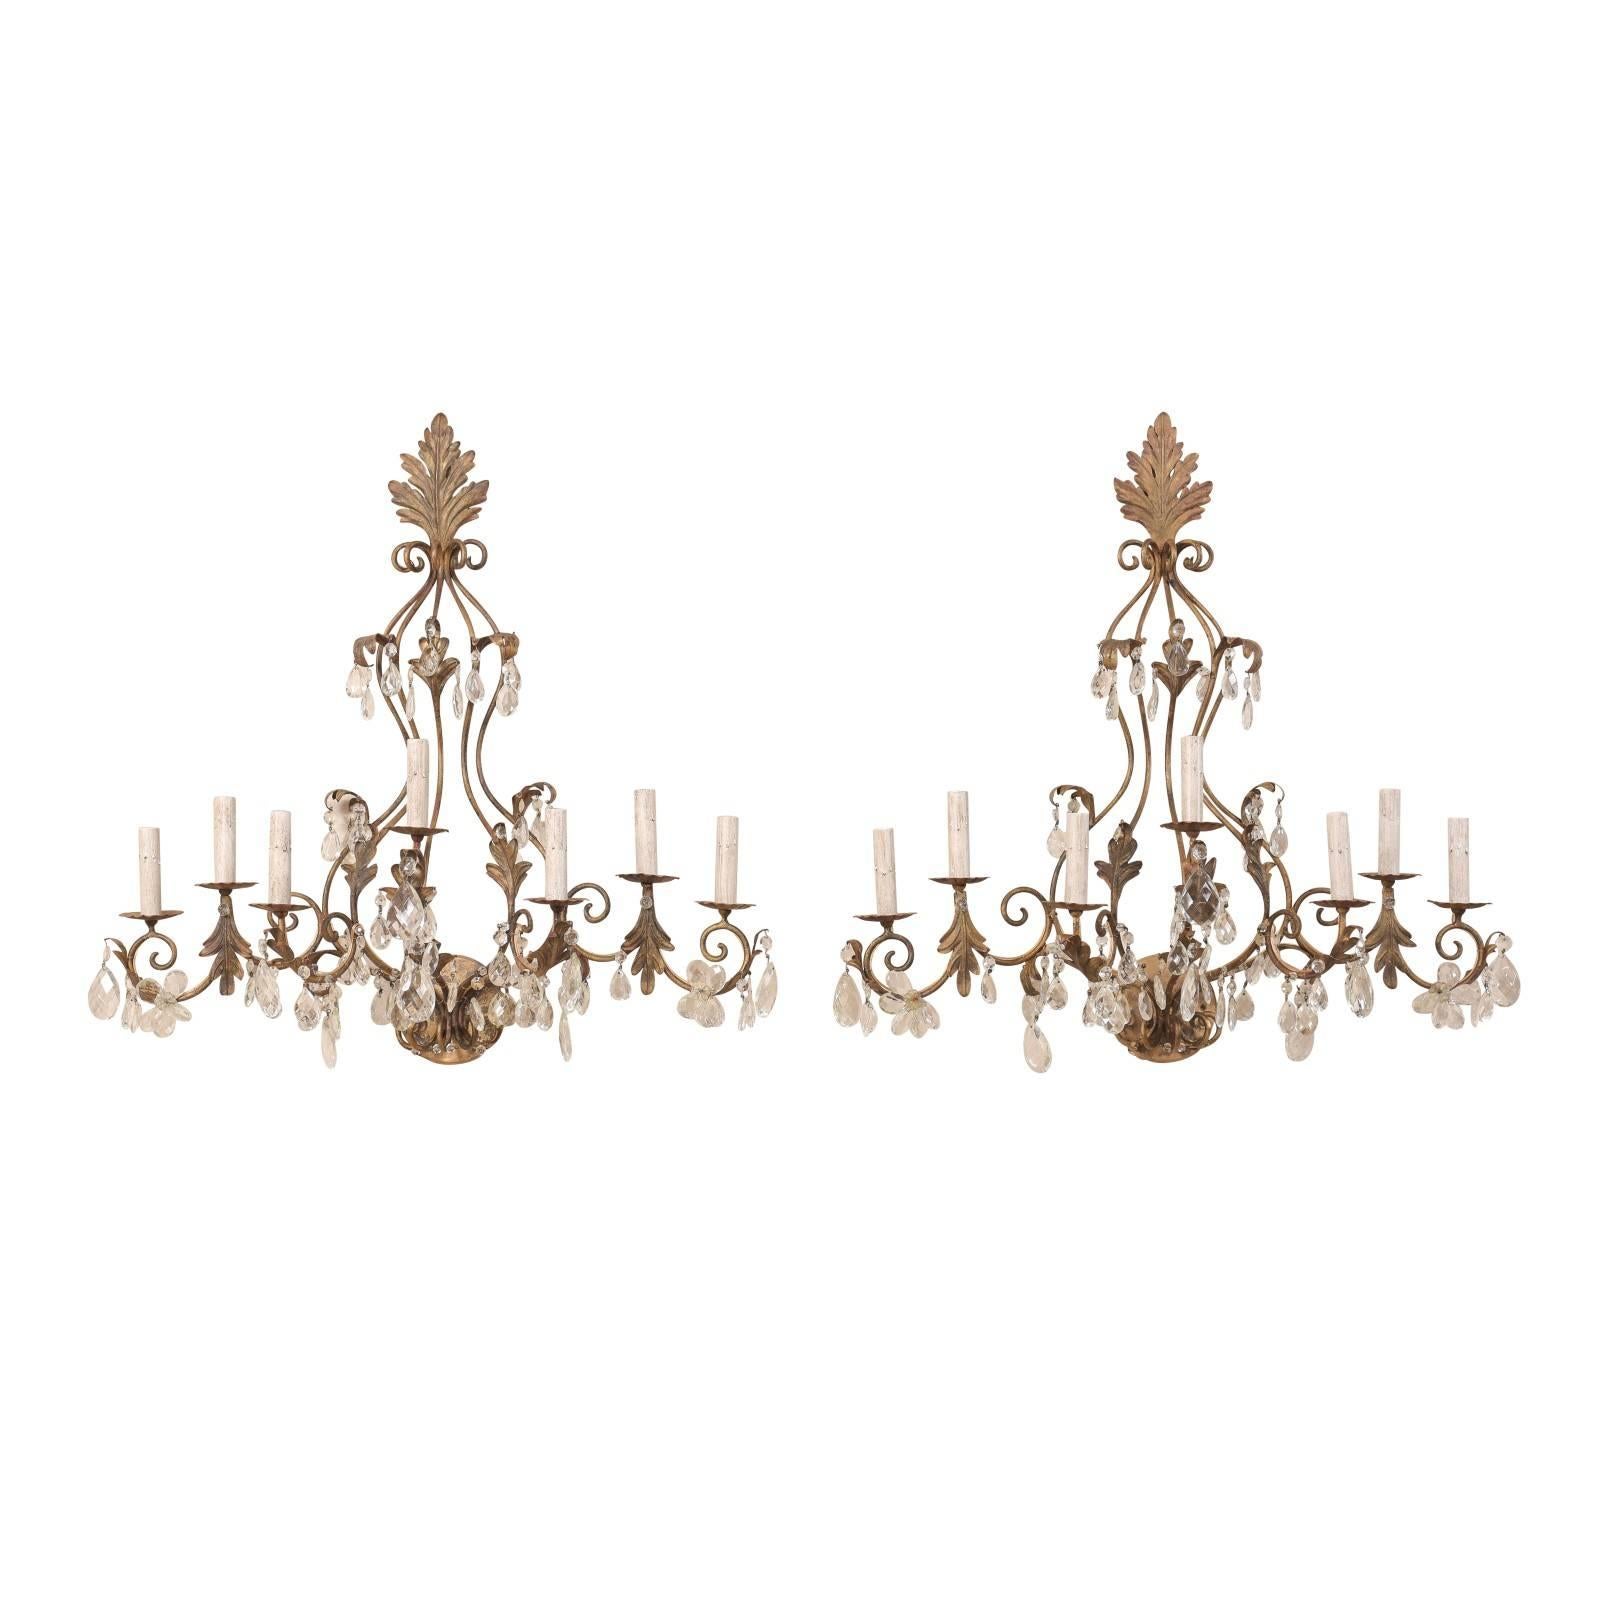 Pair of Mid-Century Seven-Light Crystal and Iron Sconces with Leaf Crest Tops